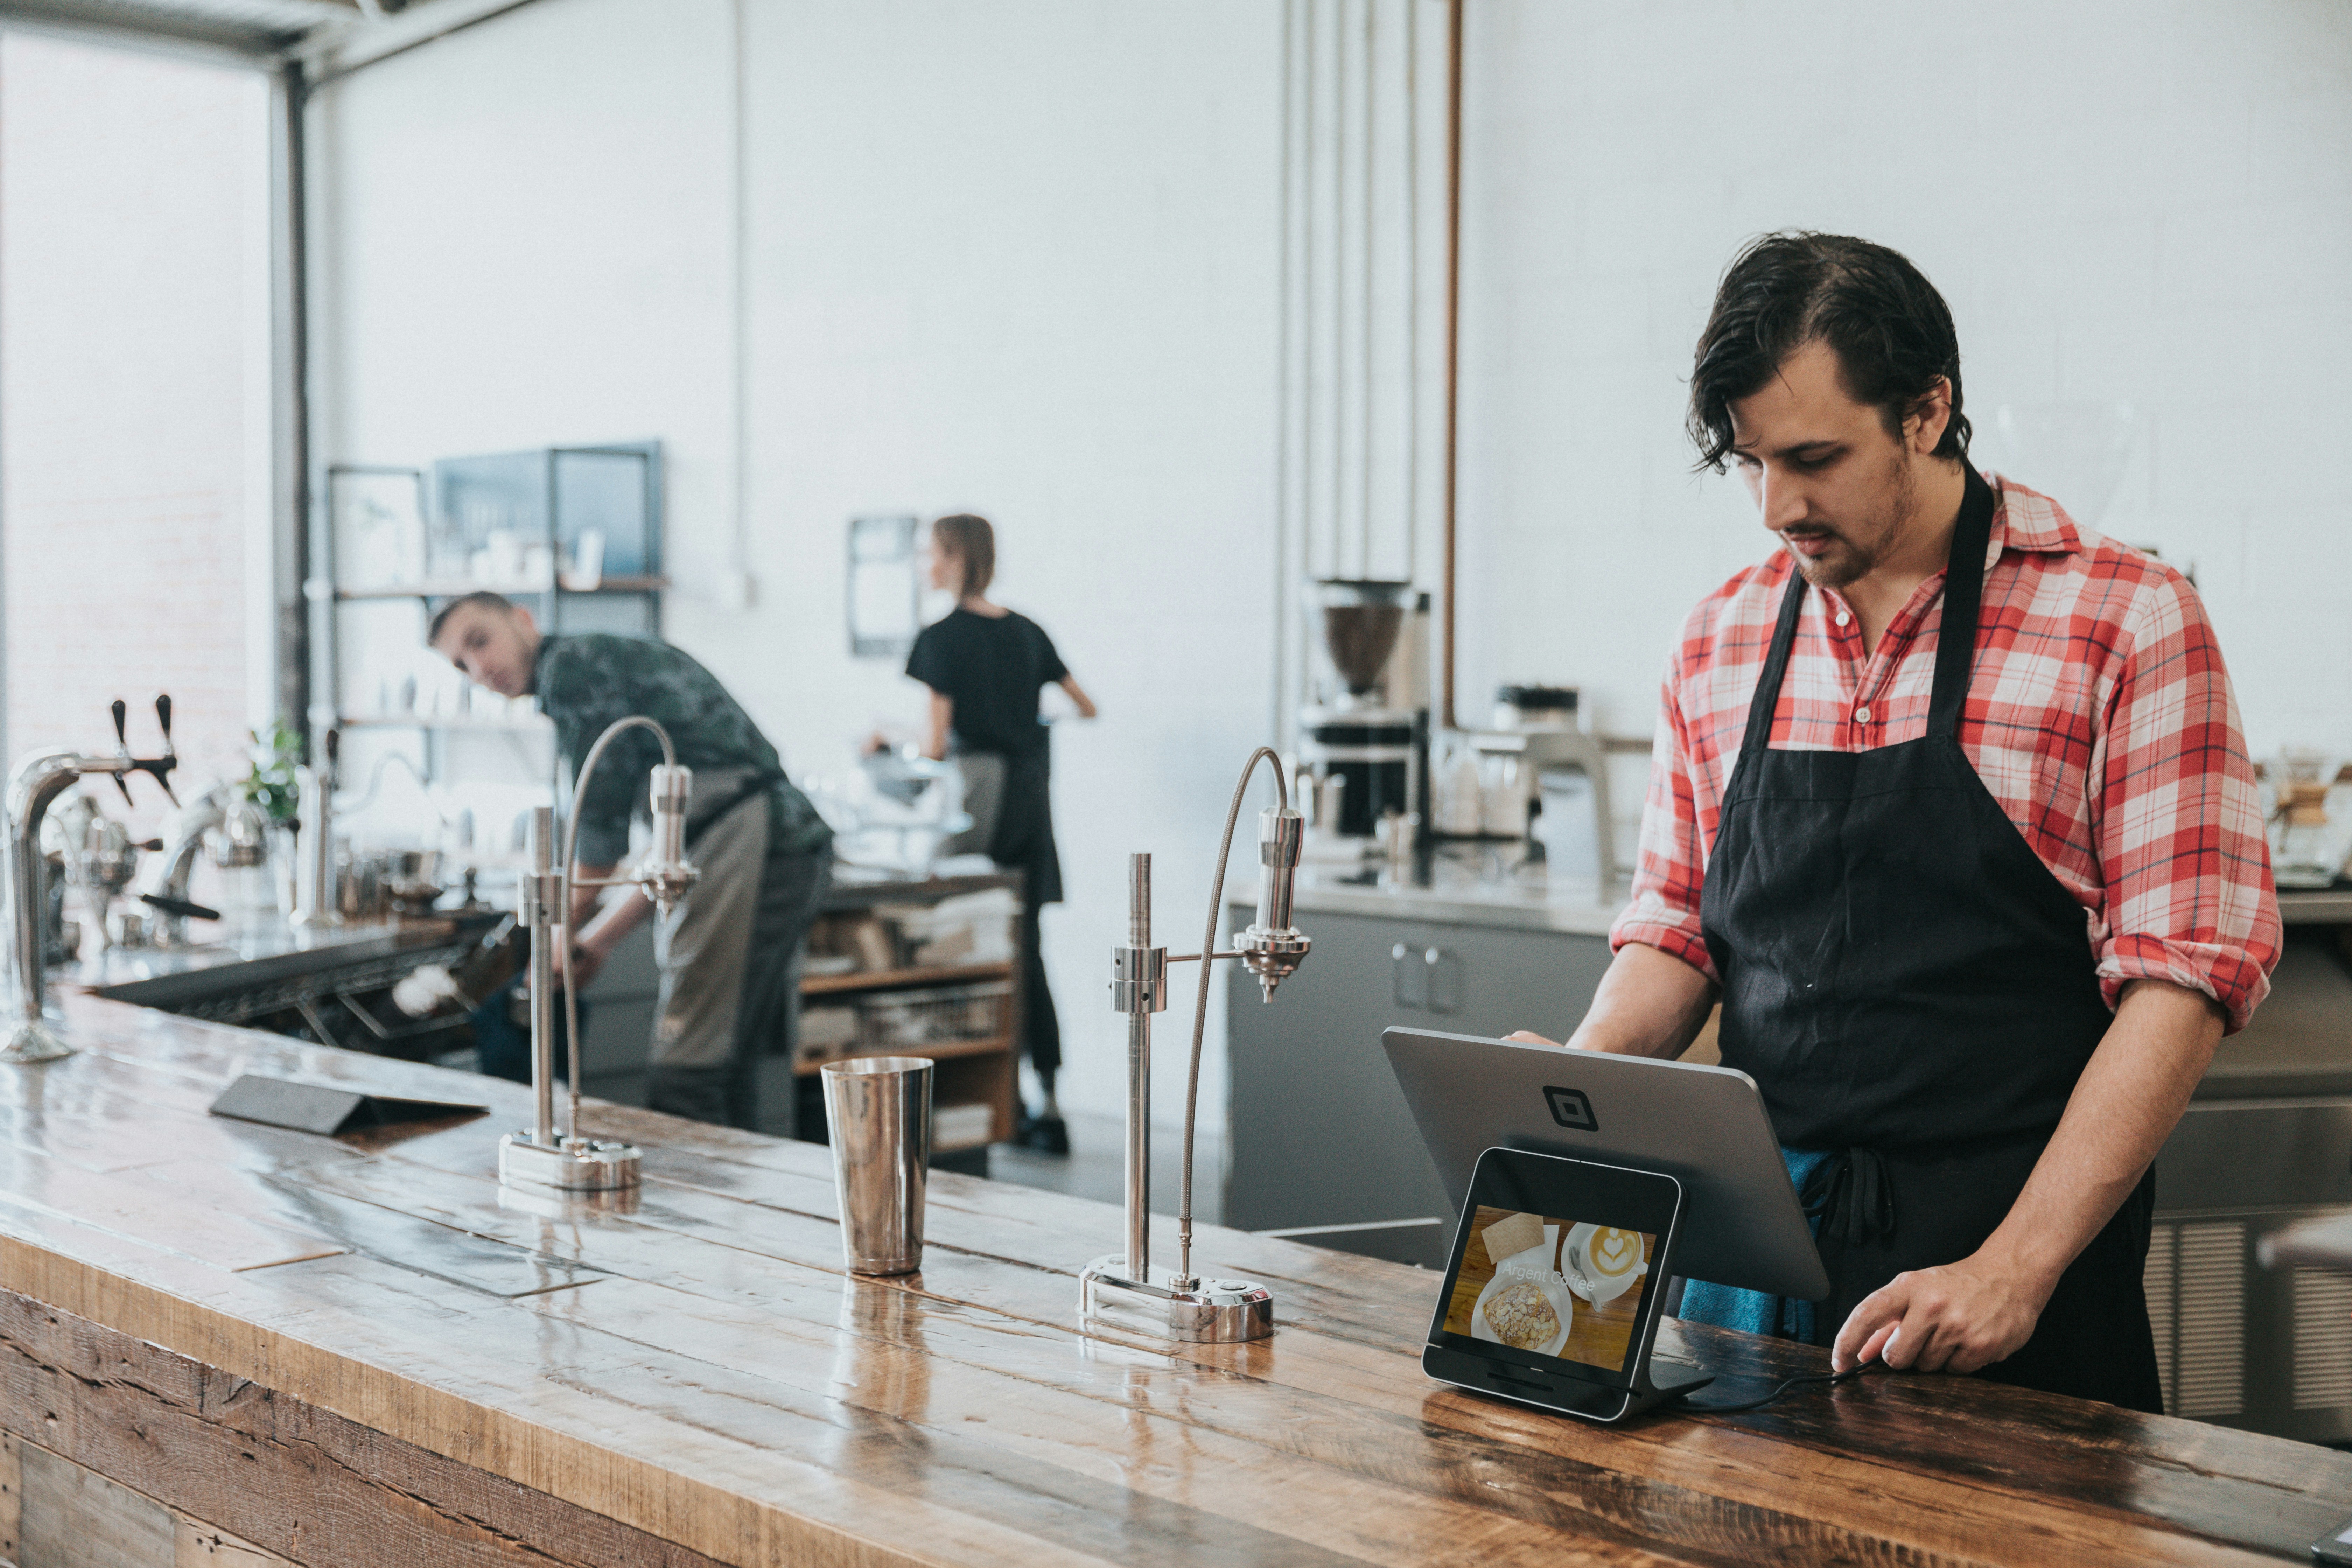 An employee operates a tablet at the counter in a café